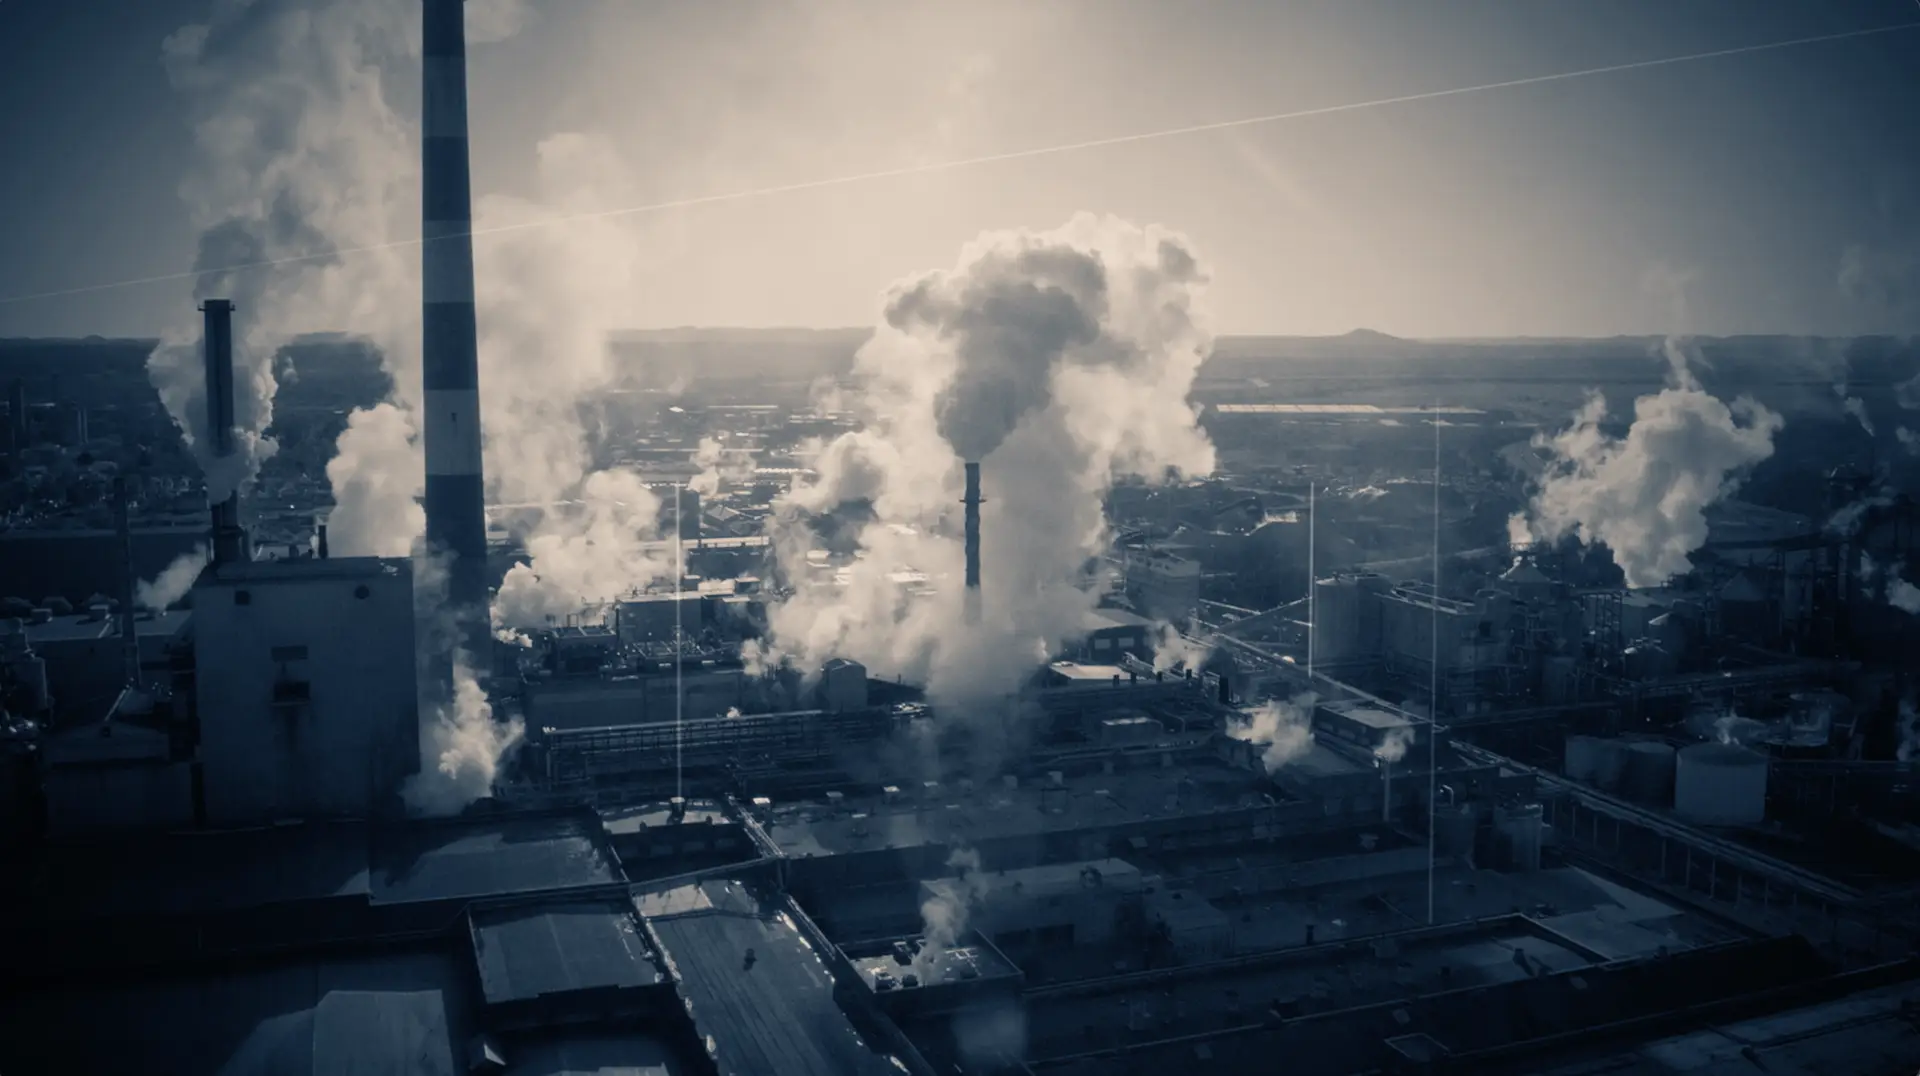 A black and white photo of a factory with smoke coming out of it, reminiscent of a scene from an Investigation Discovery true crime documentary.